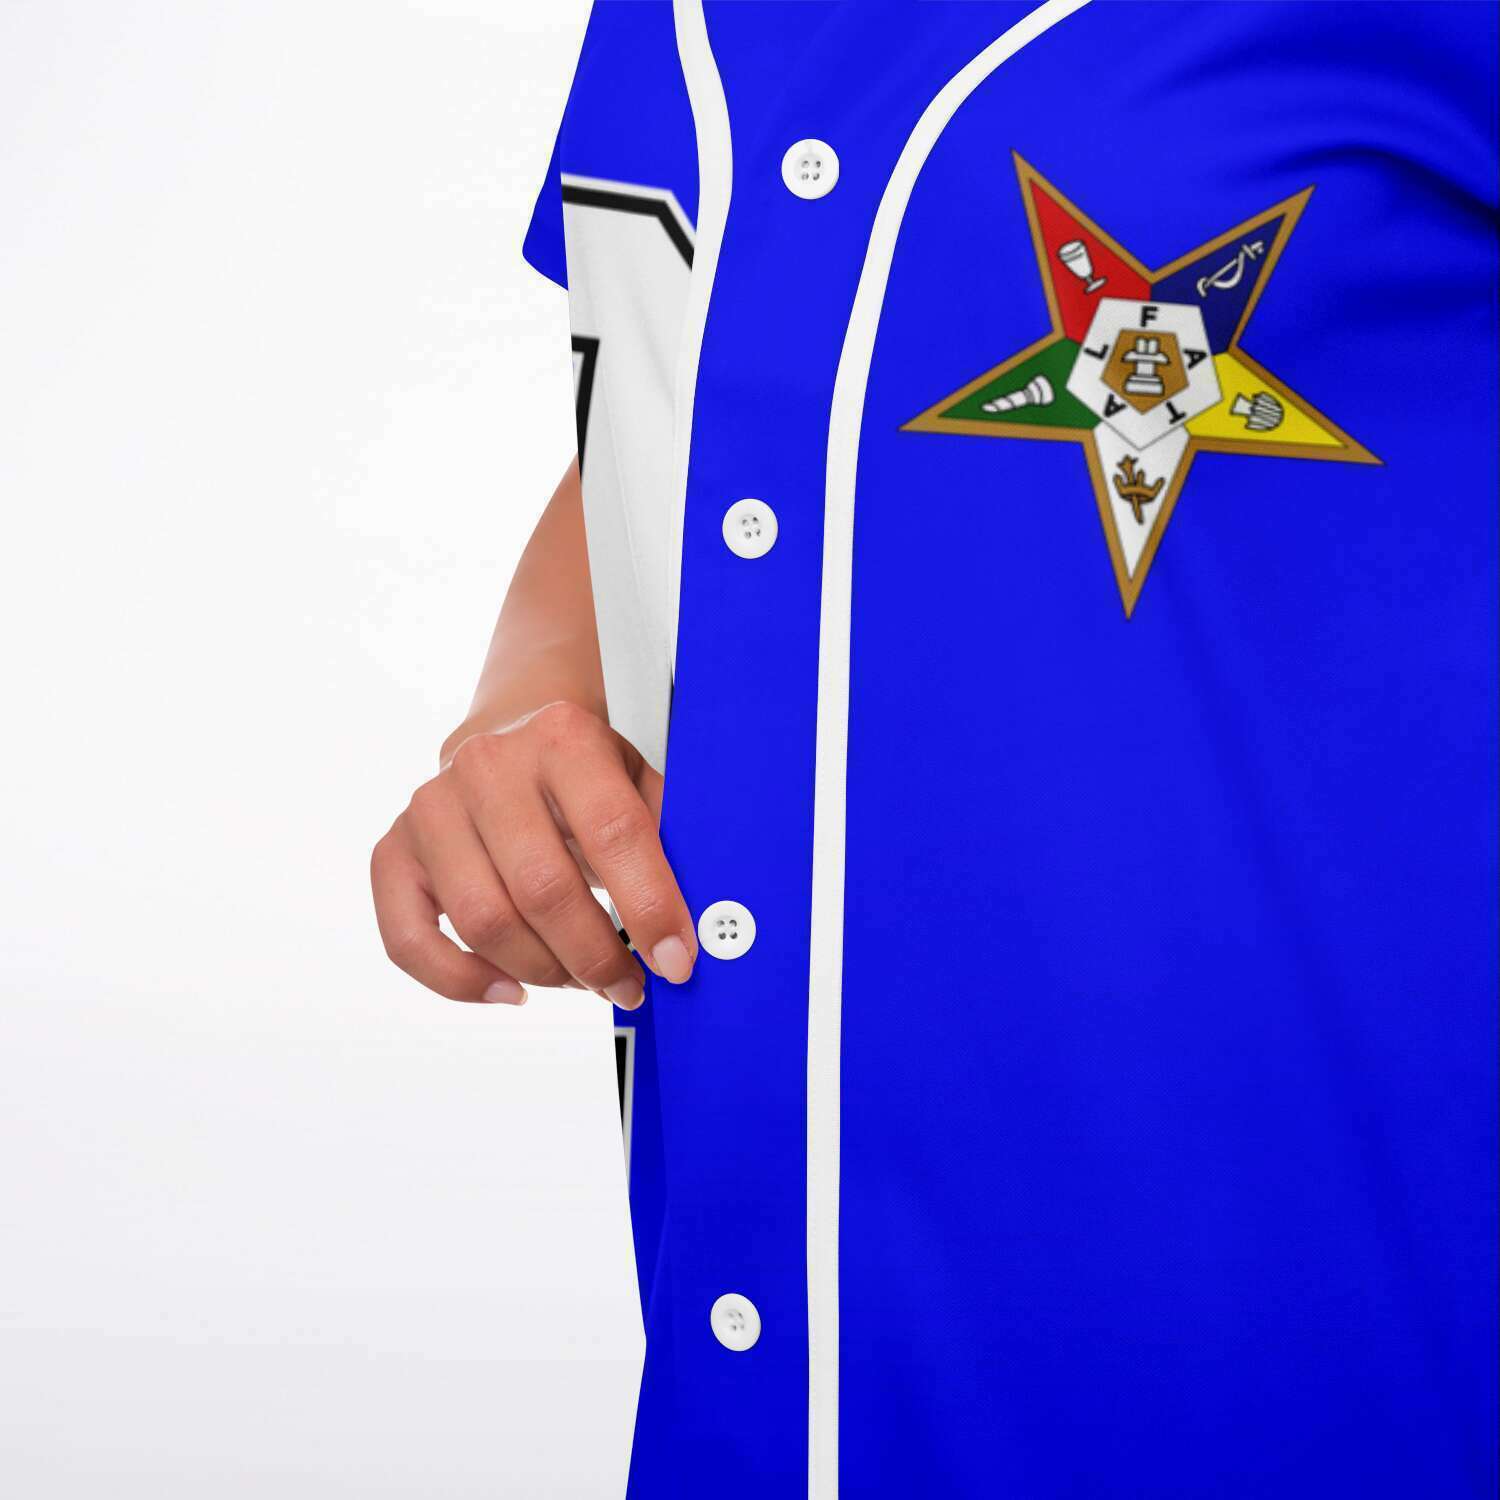 Order of the Eastern Star OES | Starry Baseball Jersey Dress